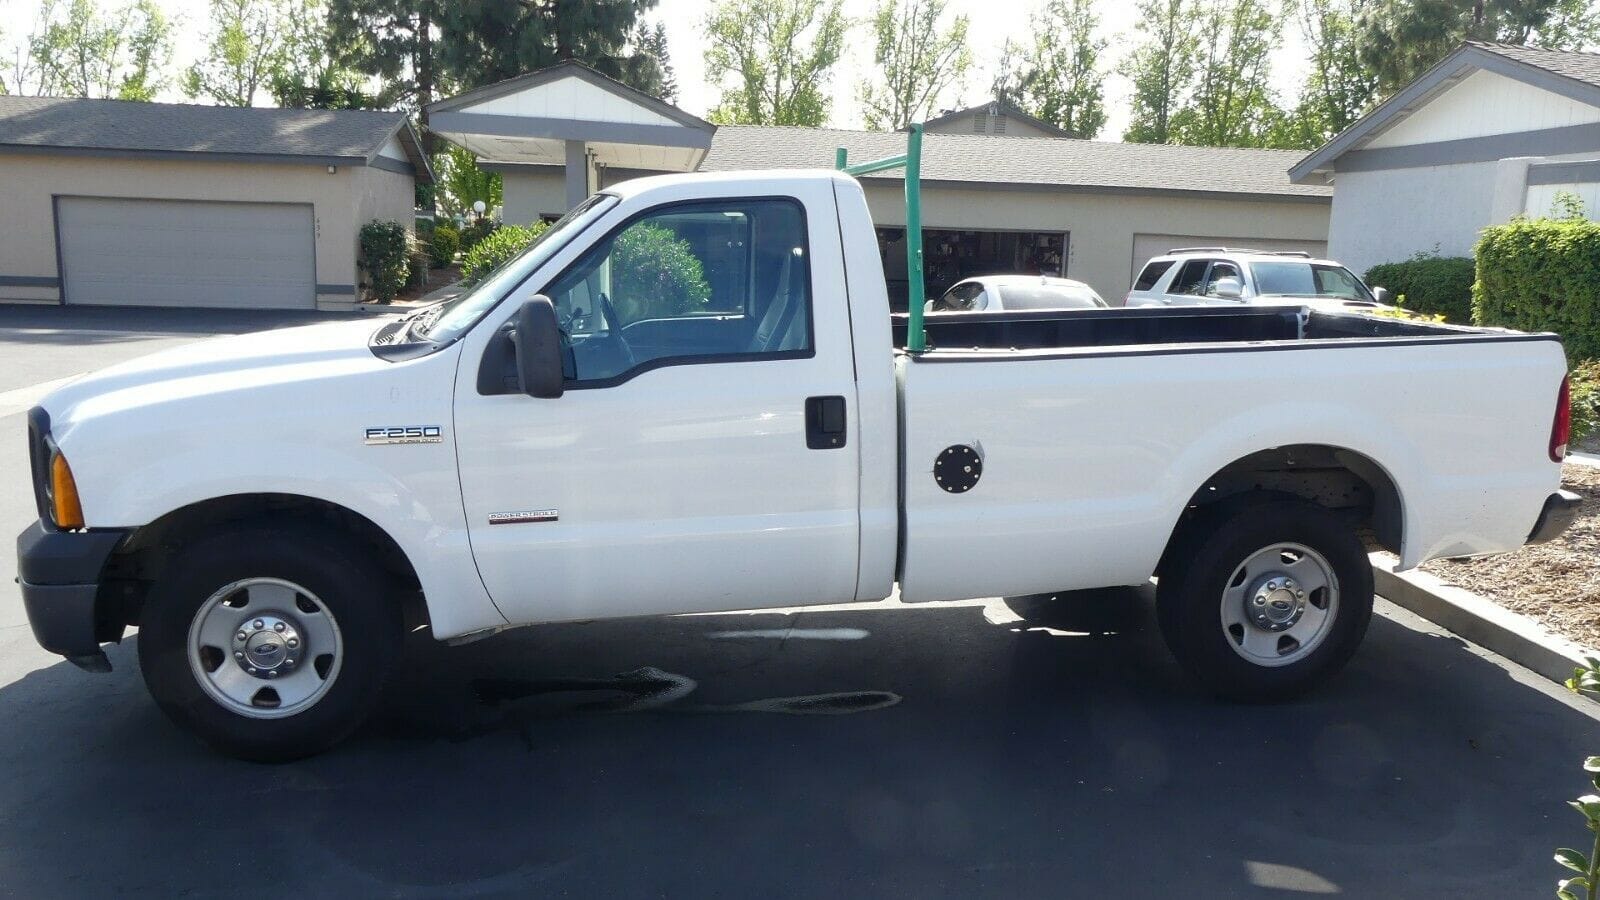 2007 Ford F-250 Super Duty - 2007 Ford F-250 6.0 PowerStroke Turbo Diesel - Used - VIN 1FTSF20P27EA60228 - 162,000 Miles - 8 cyl - 2WD - Automatic - Truck - White - Oceanside, CA 92058, United States